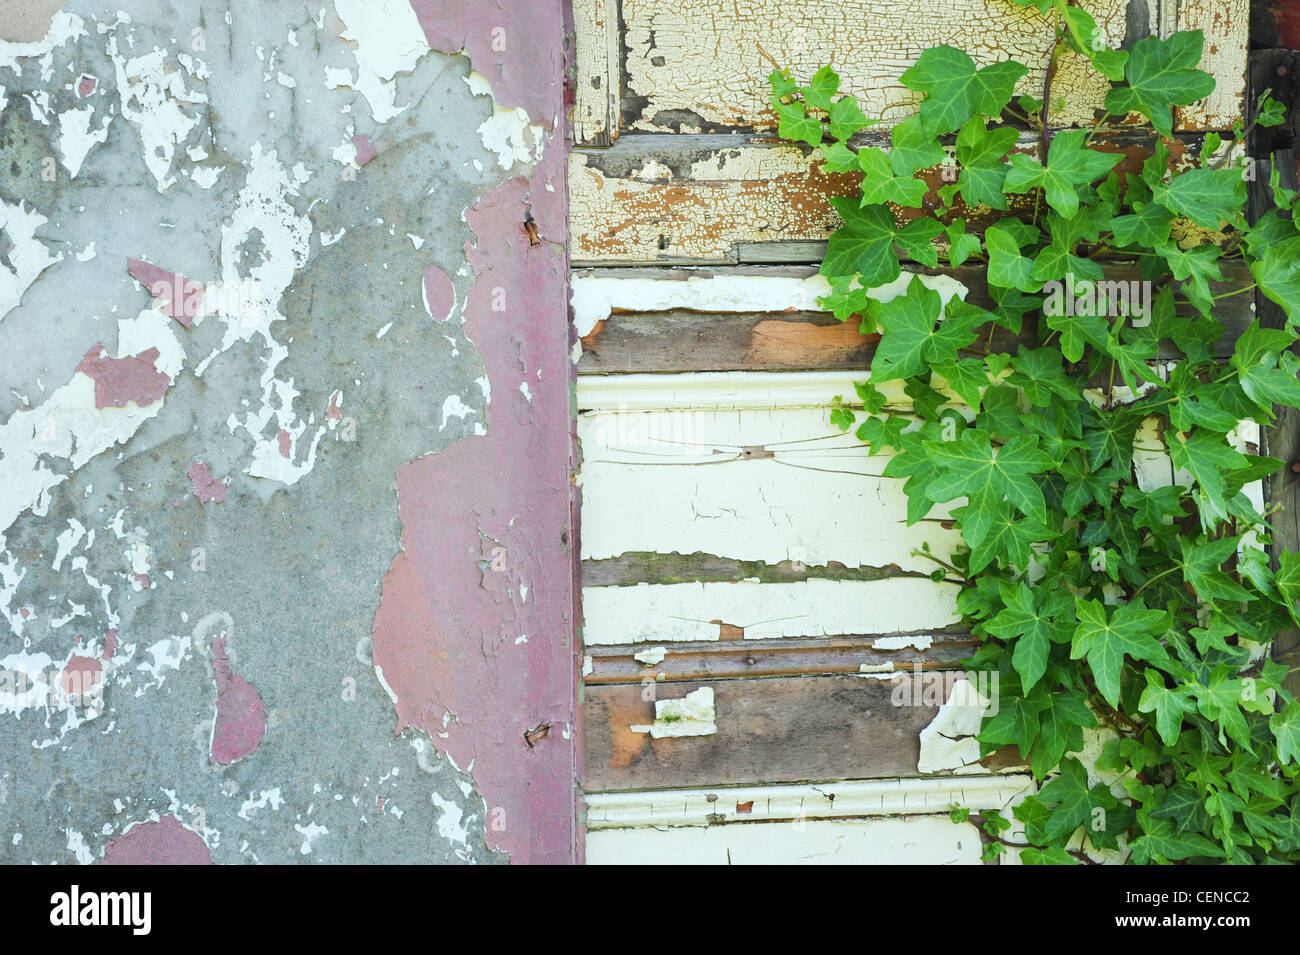 Shabby, deteriorating paint and woodwork with ivy growing across it Stock Photo